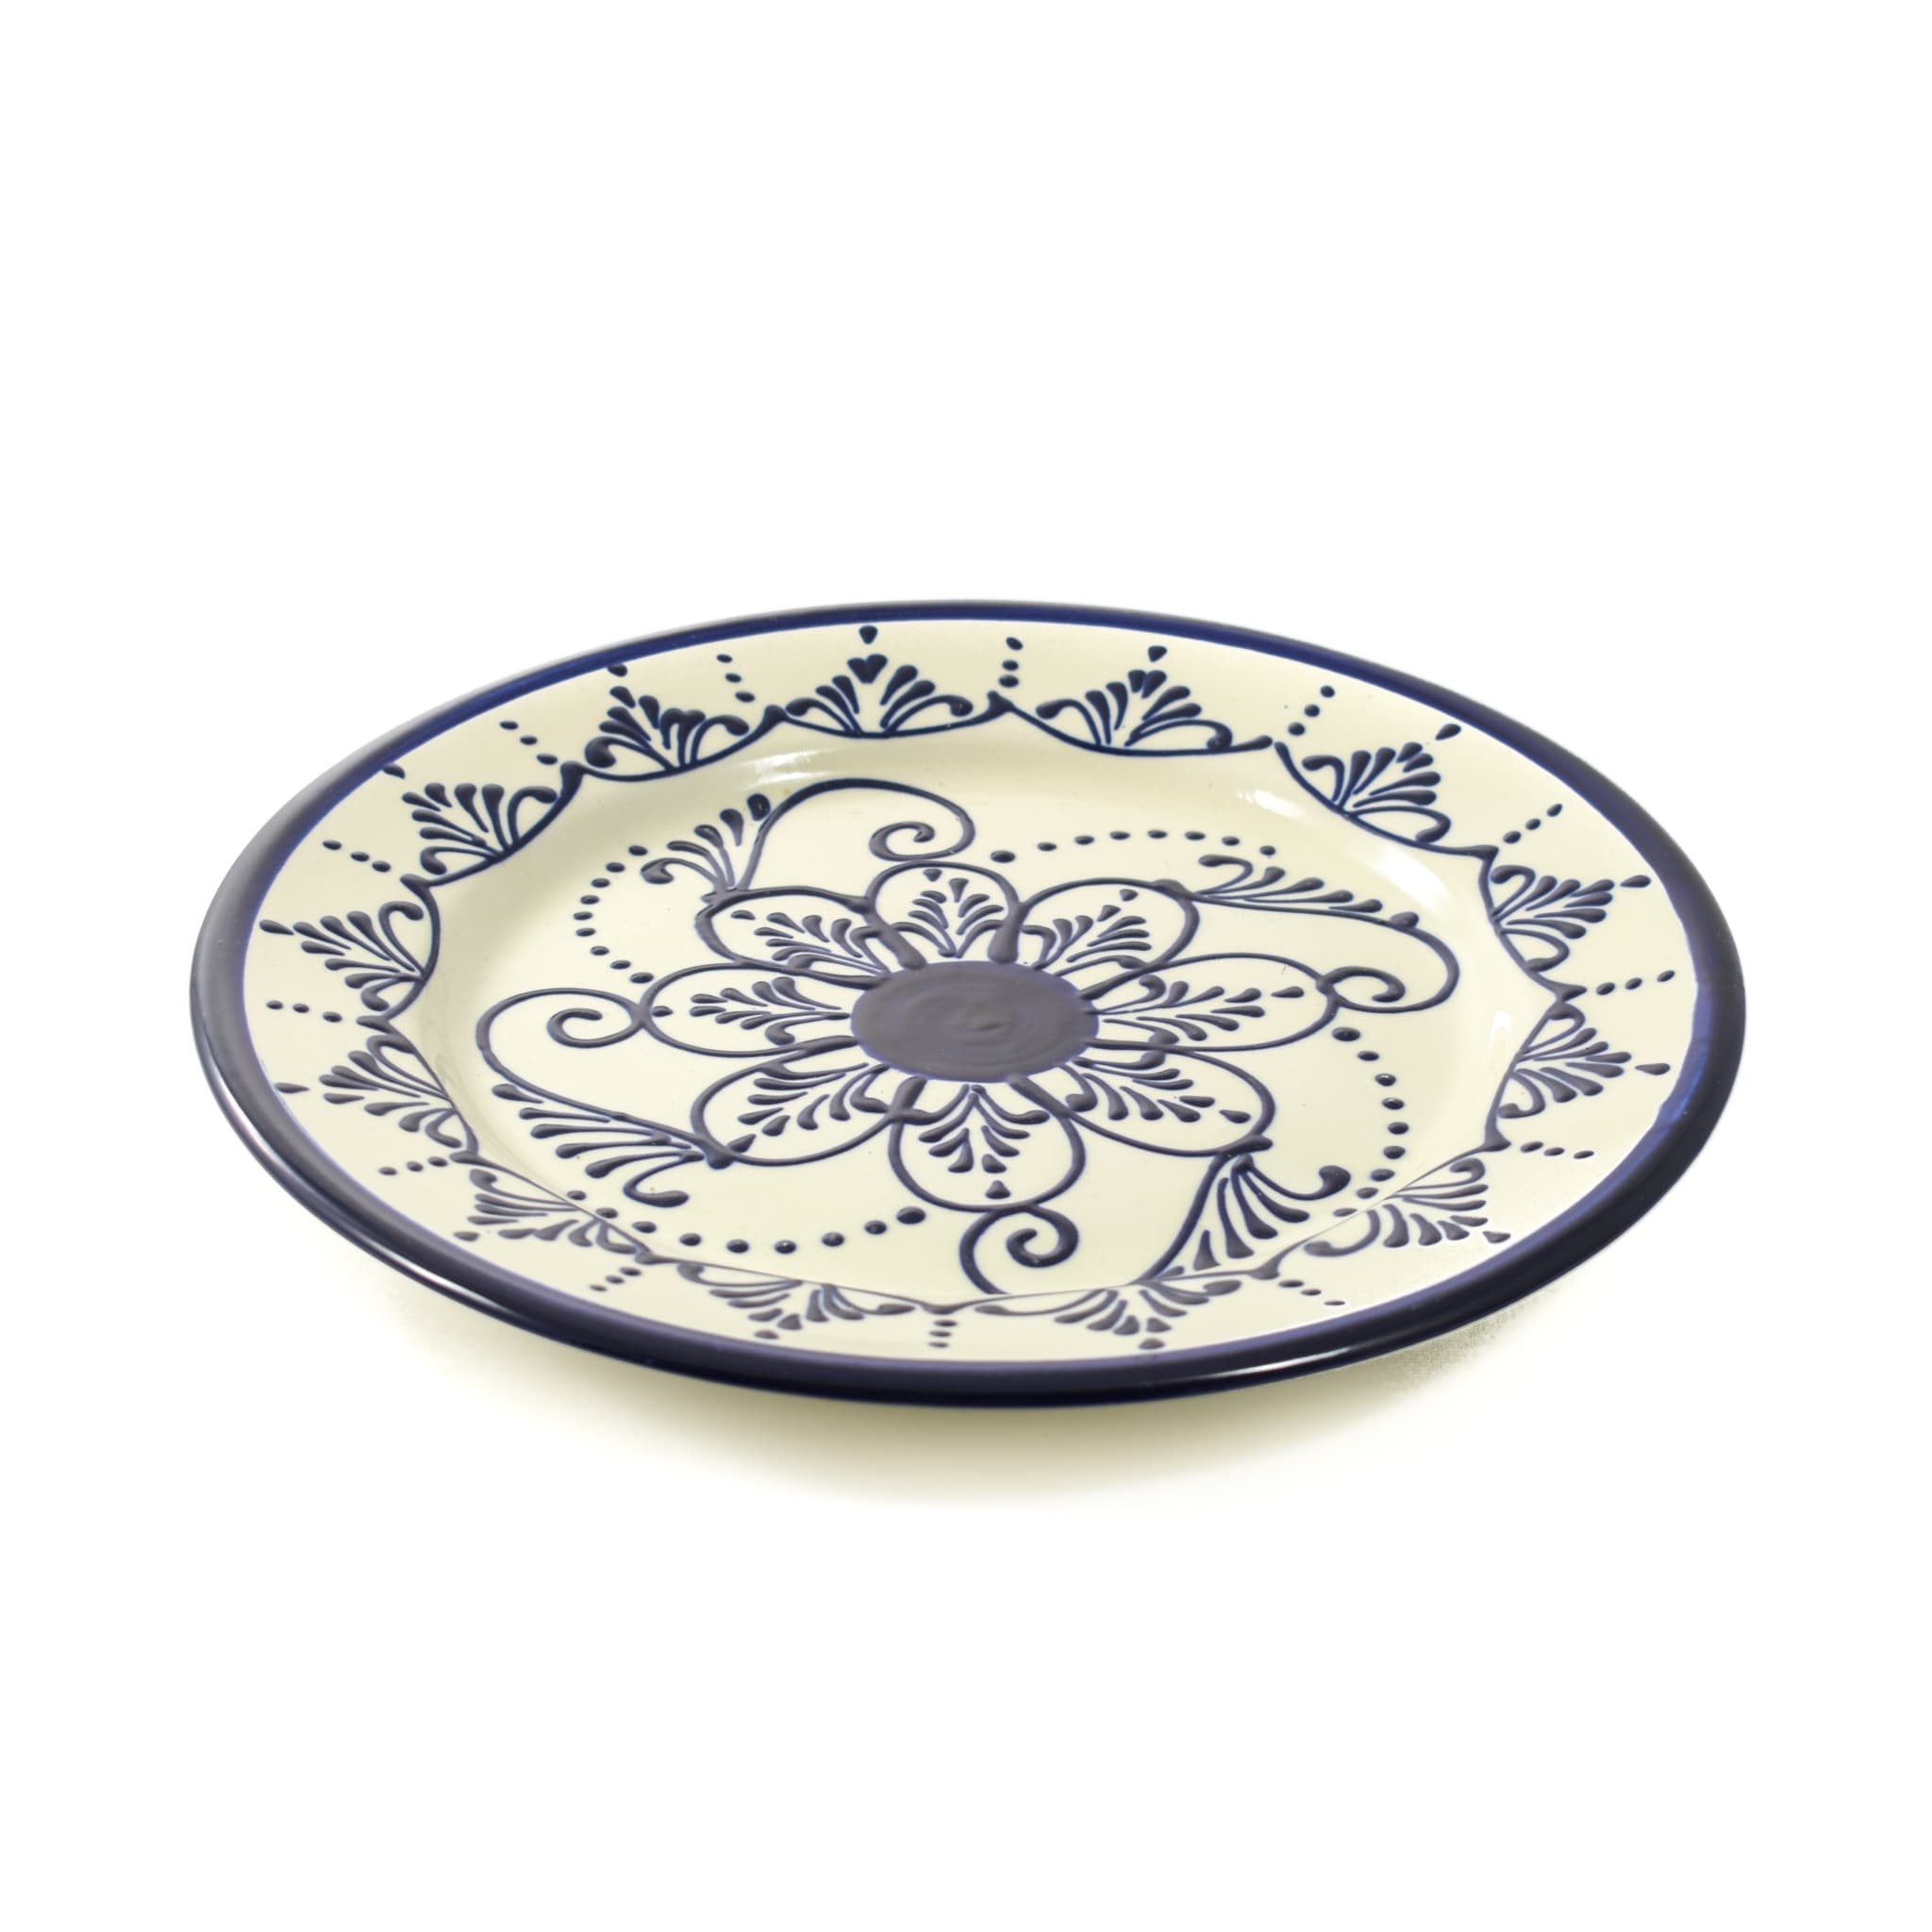 Sous Chef Andalucia Dinner Plate 26cm Painted Spanish Tableware